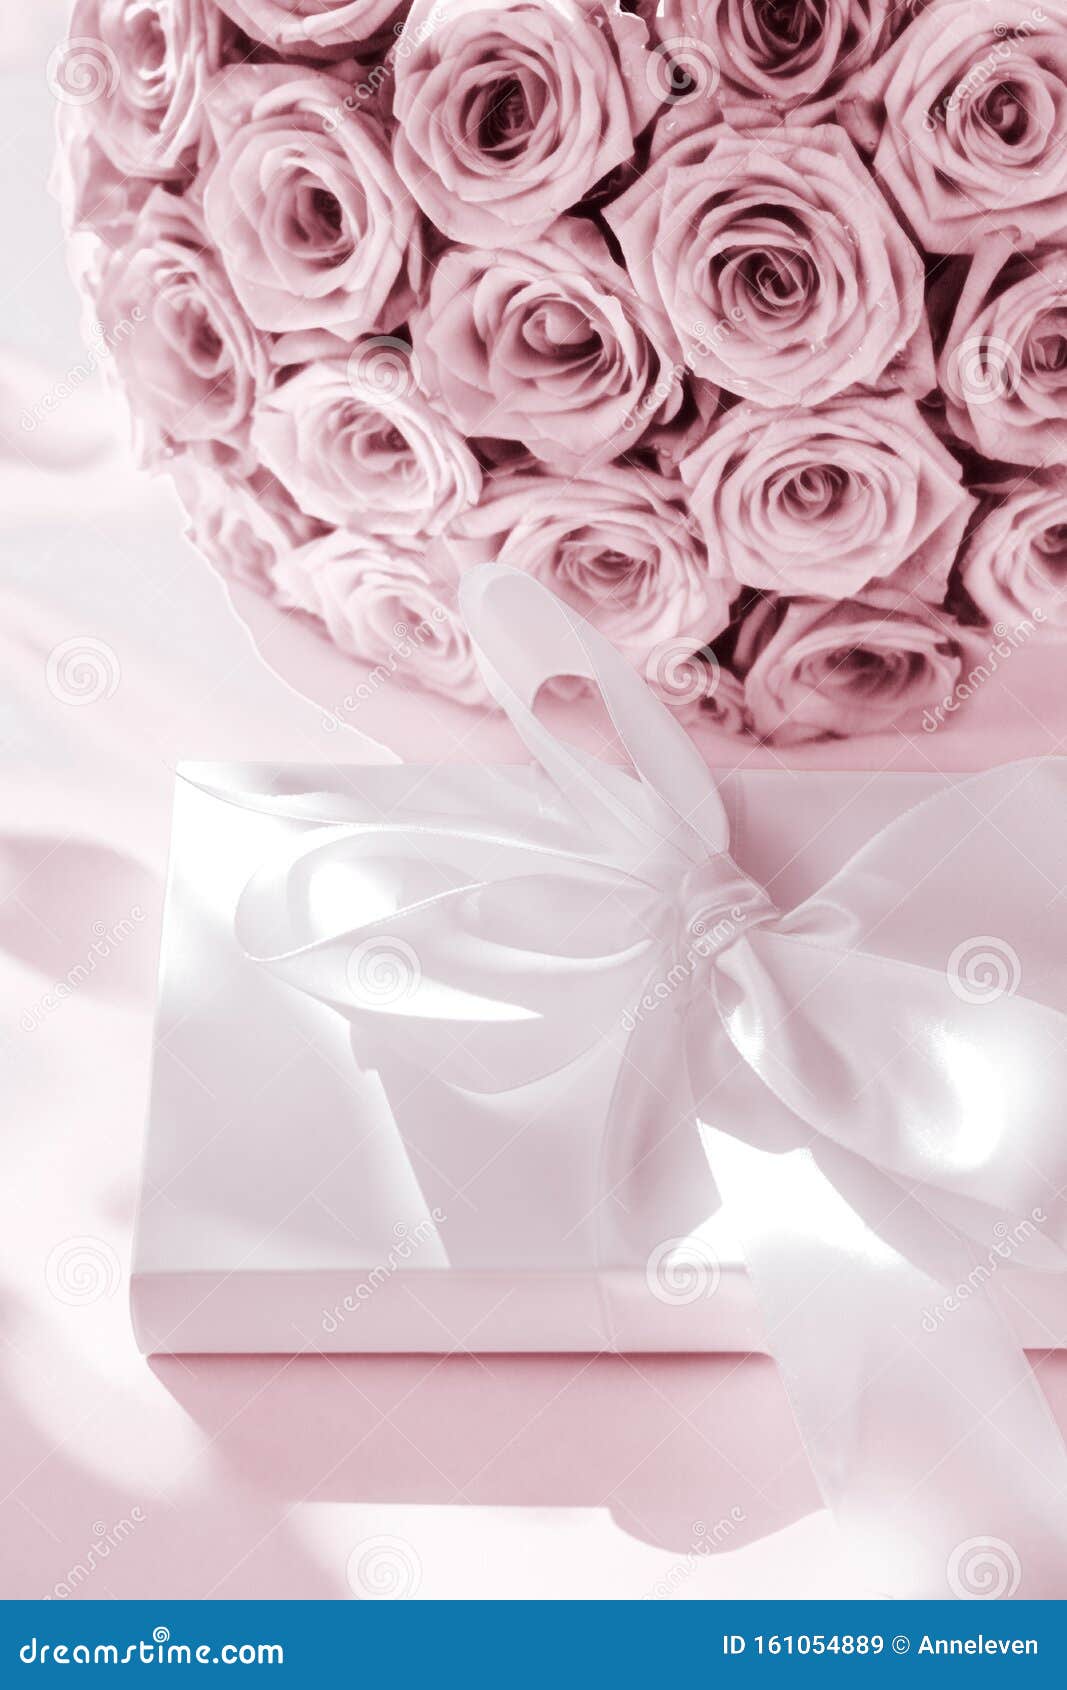 Luxury Holiday Silk Gift Box and Bouquet of Roses on Blush Pink ...